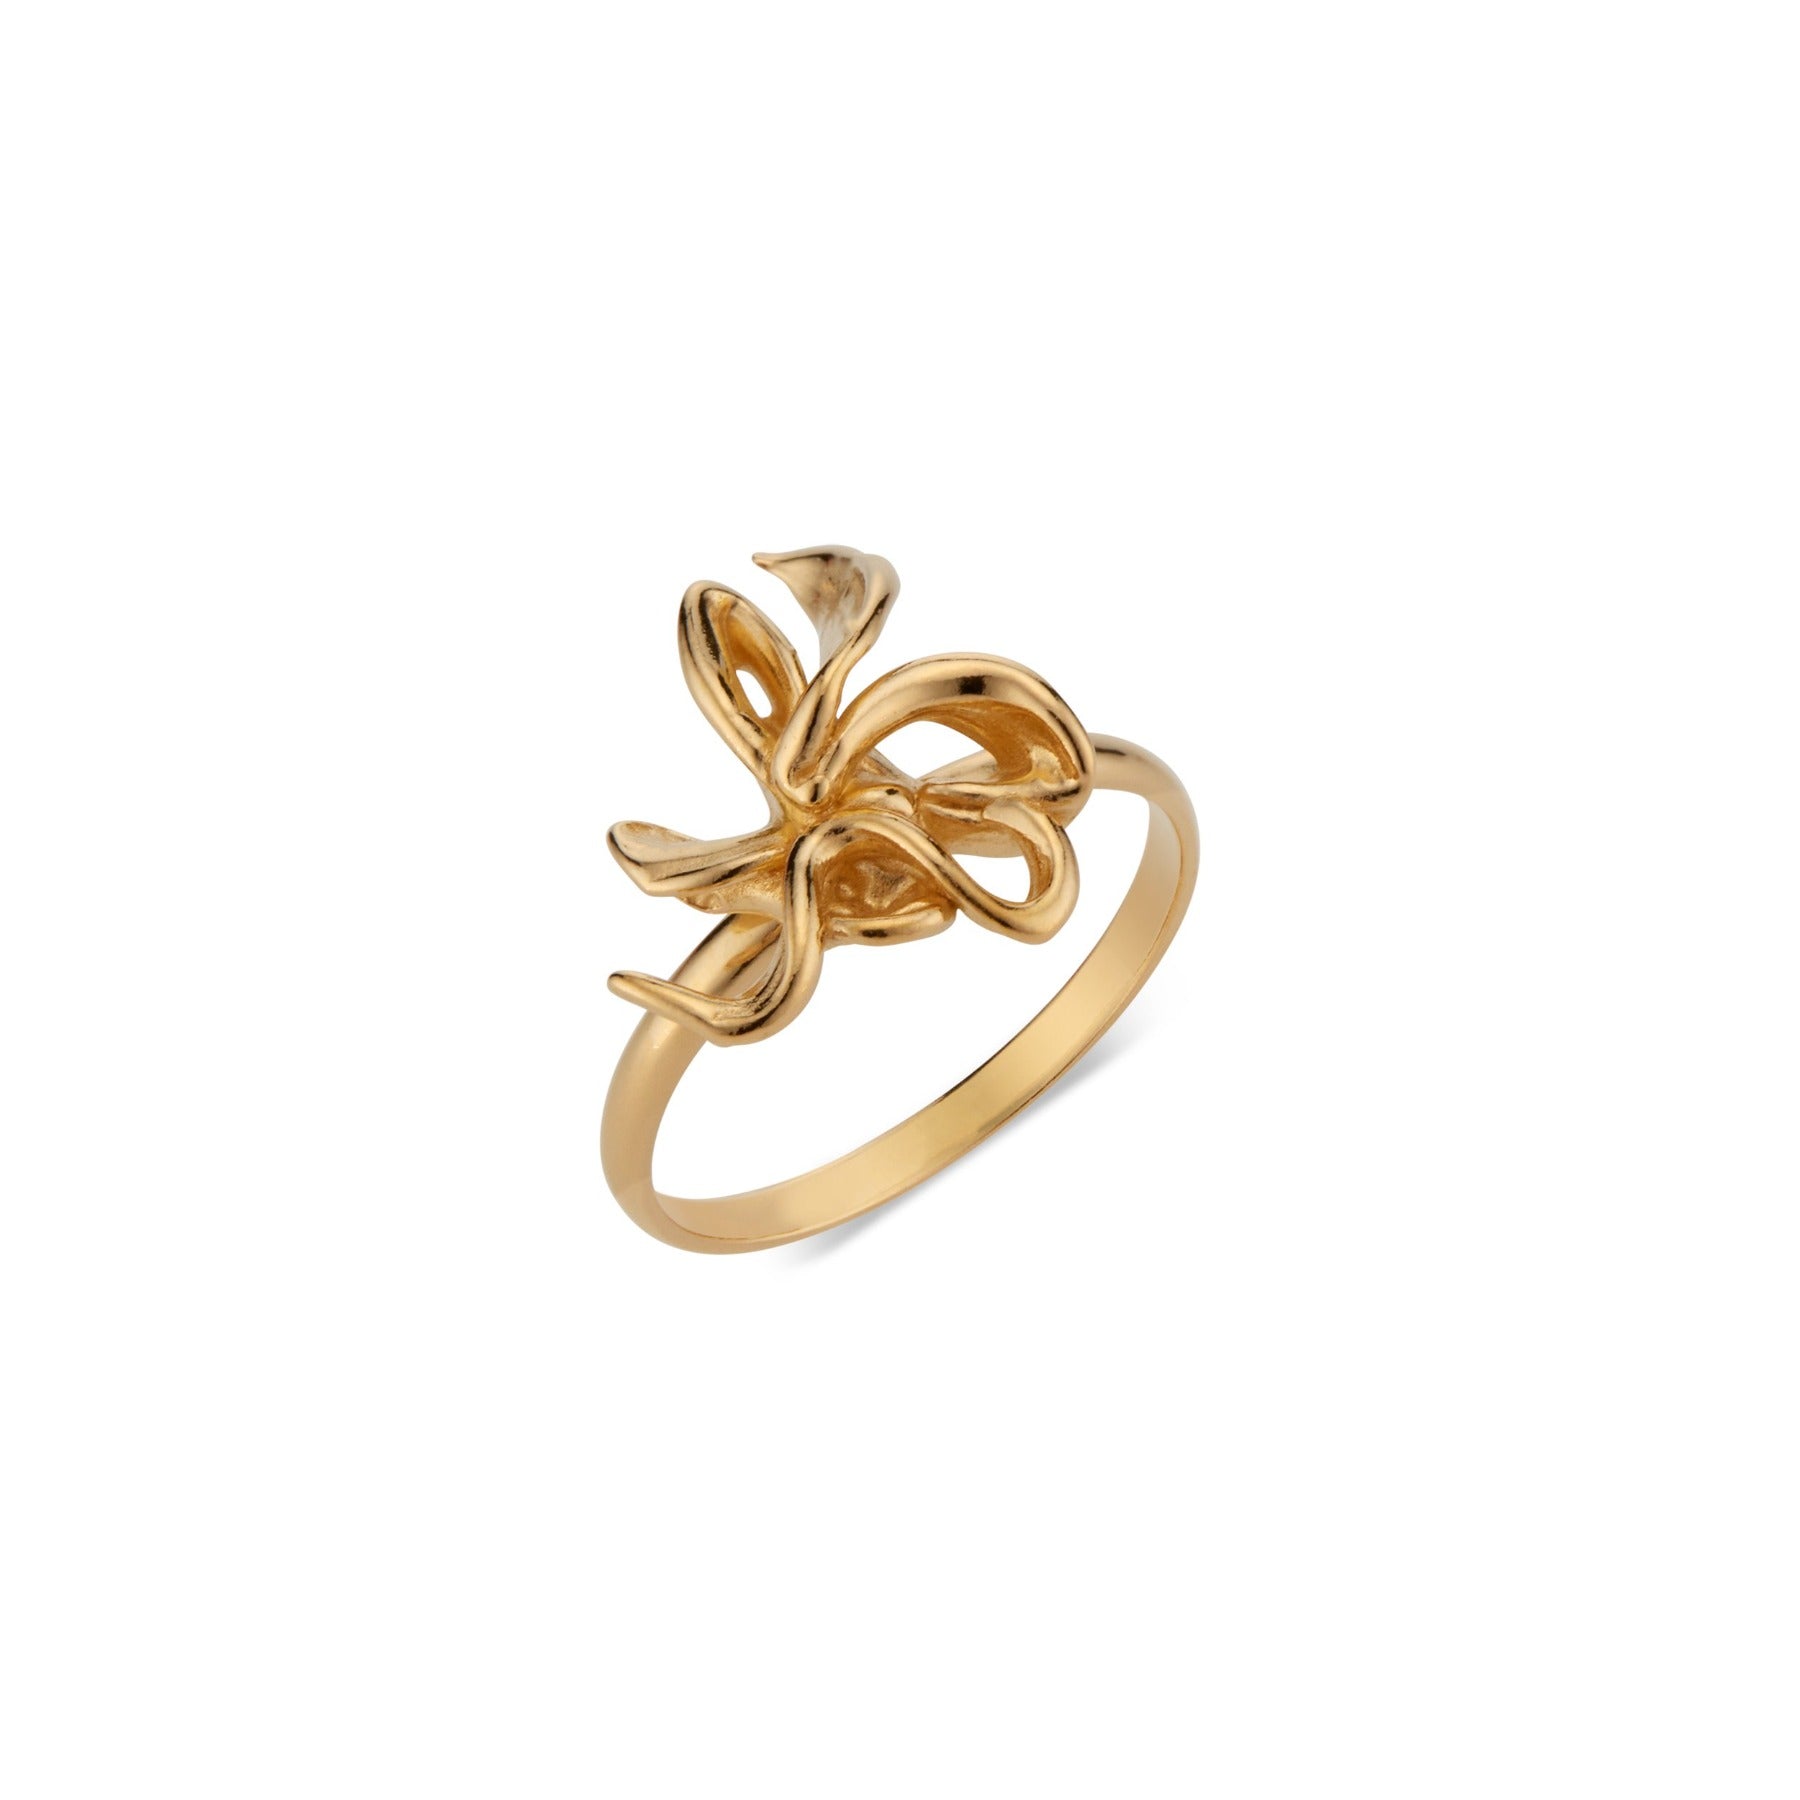 Abstract sculptural lily flower ring in 18k gold vermeil.